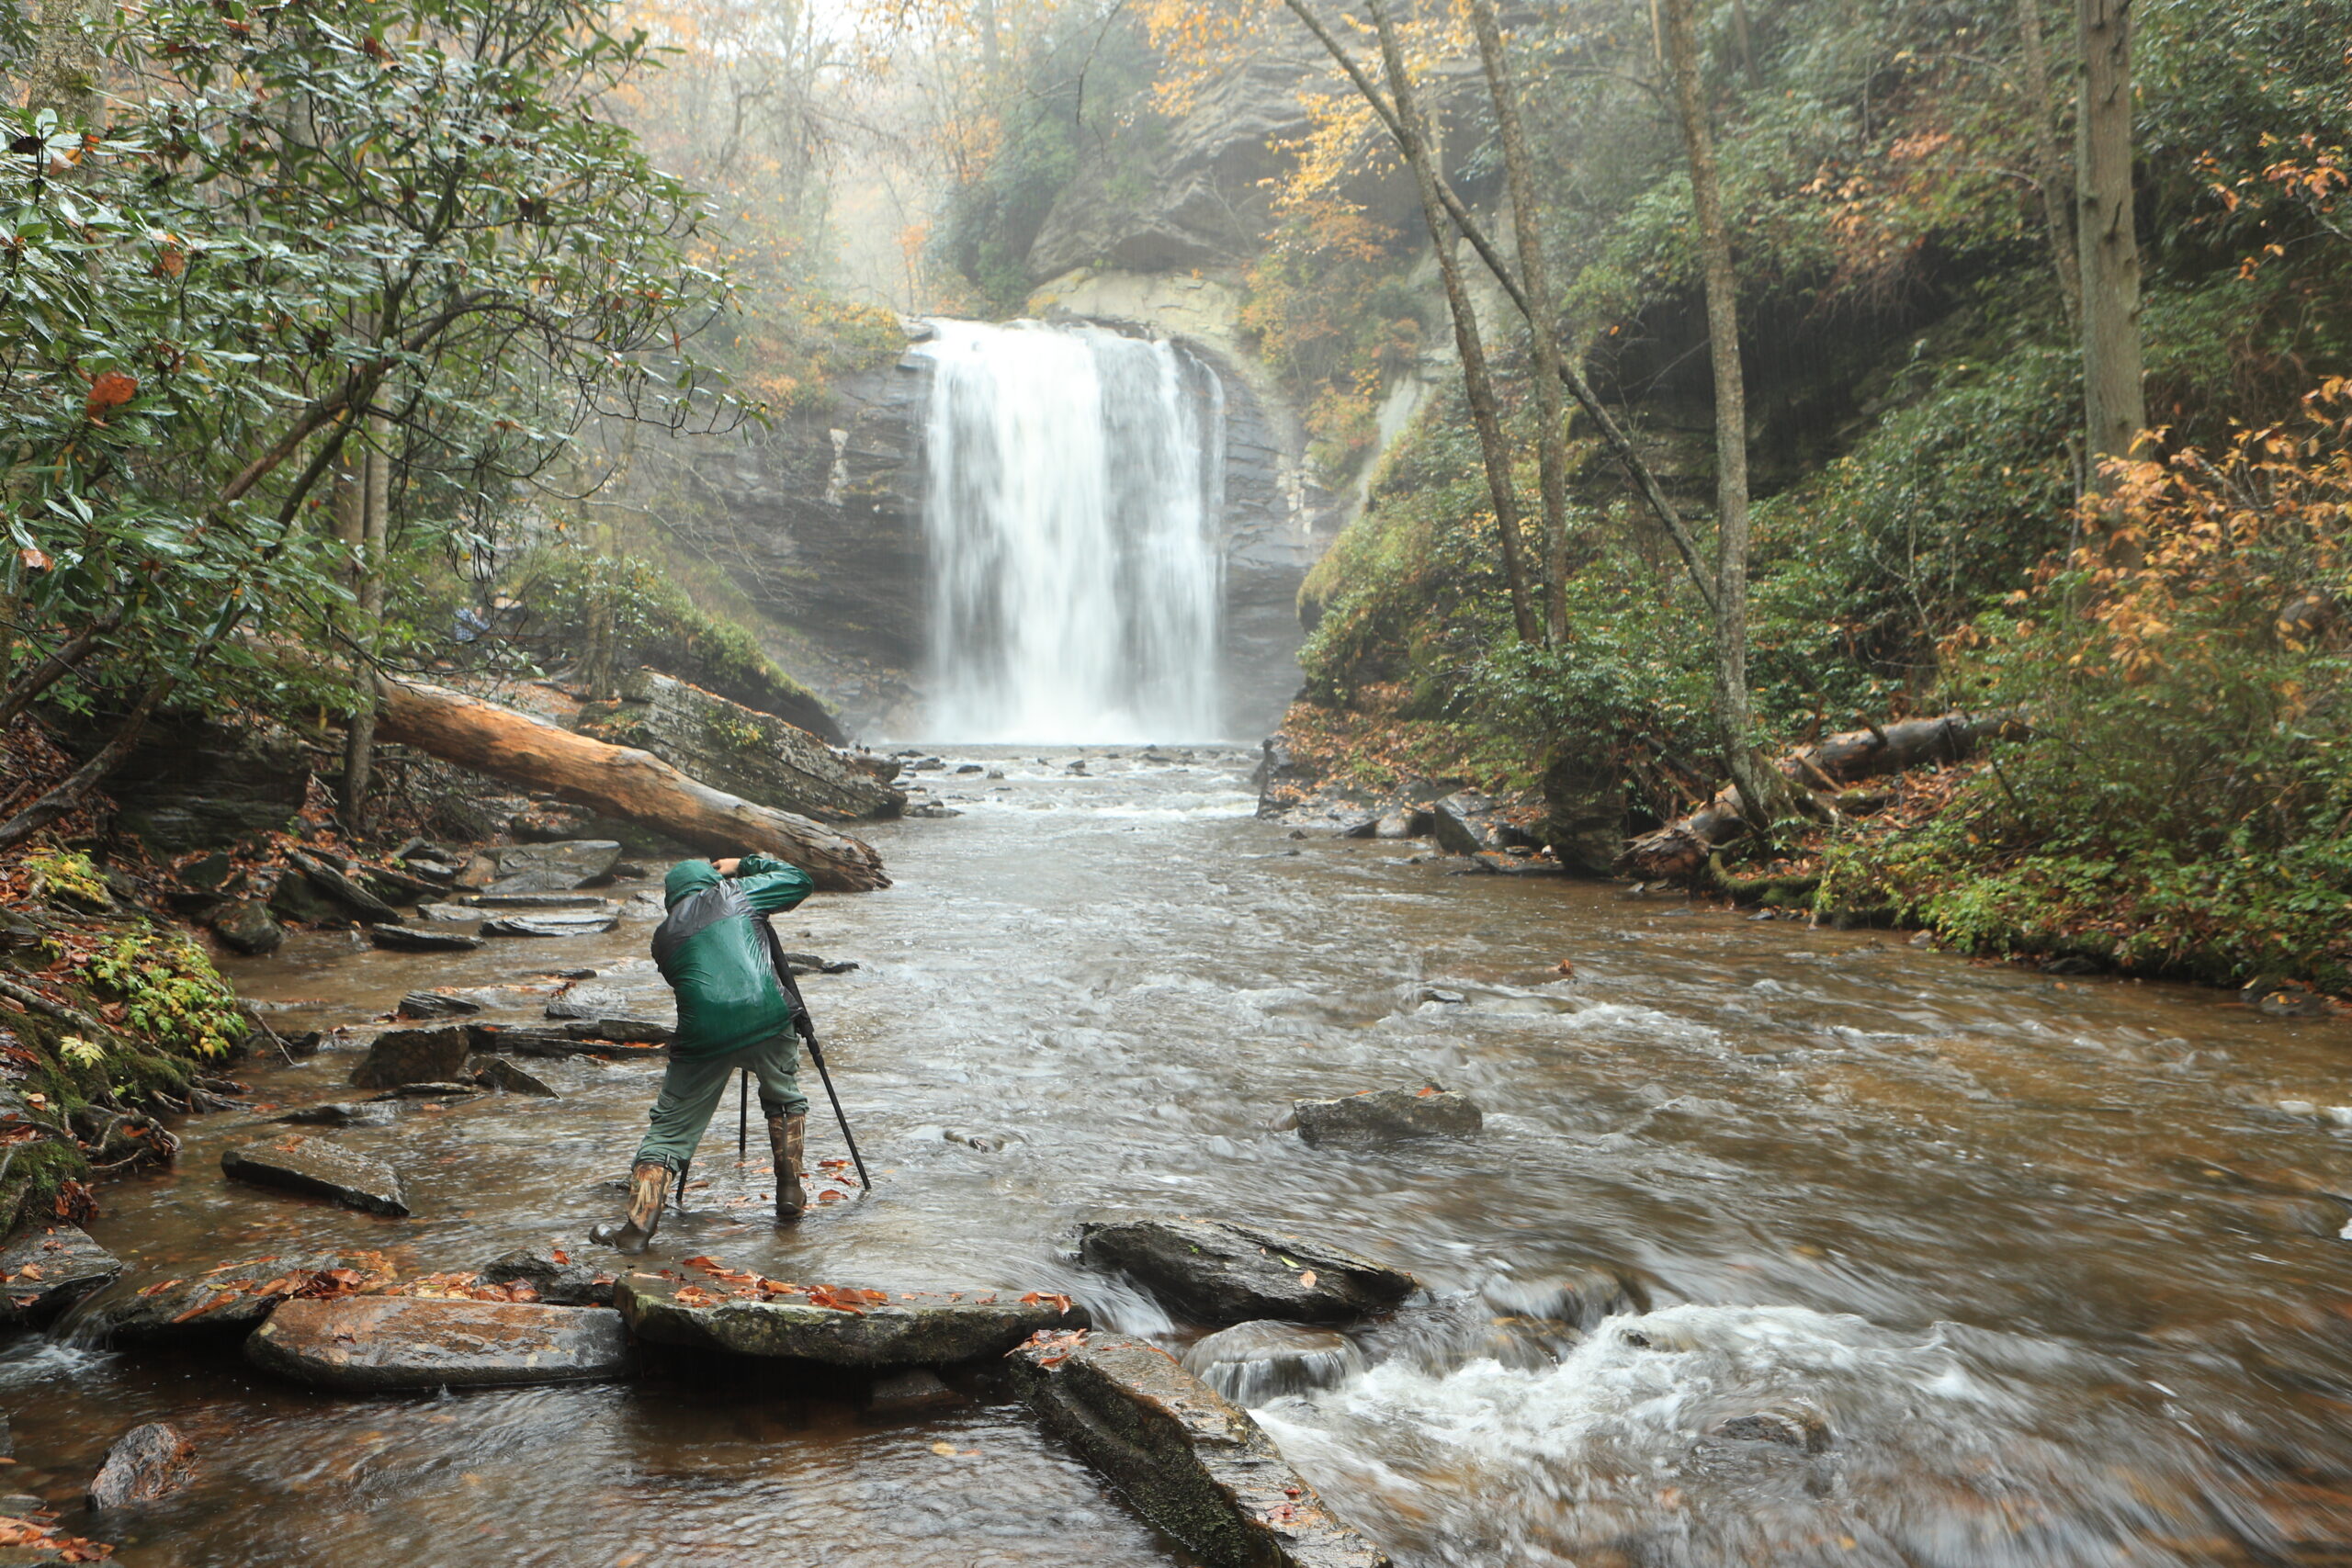 Photographer with tripod standing in river taking picture of waterfall.